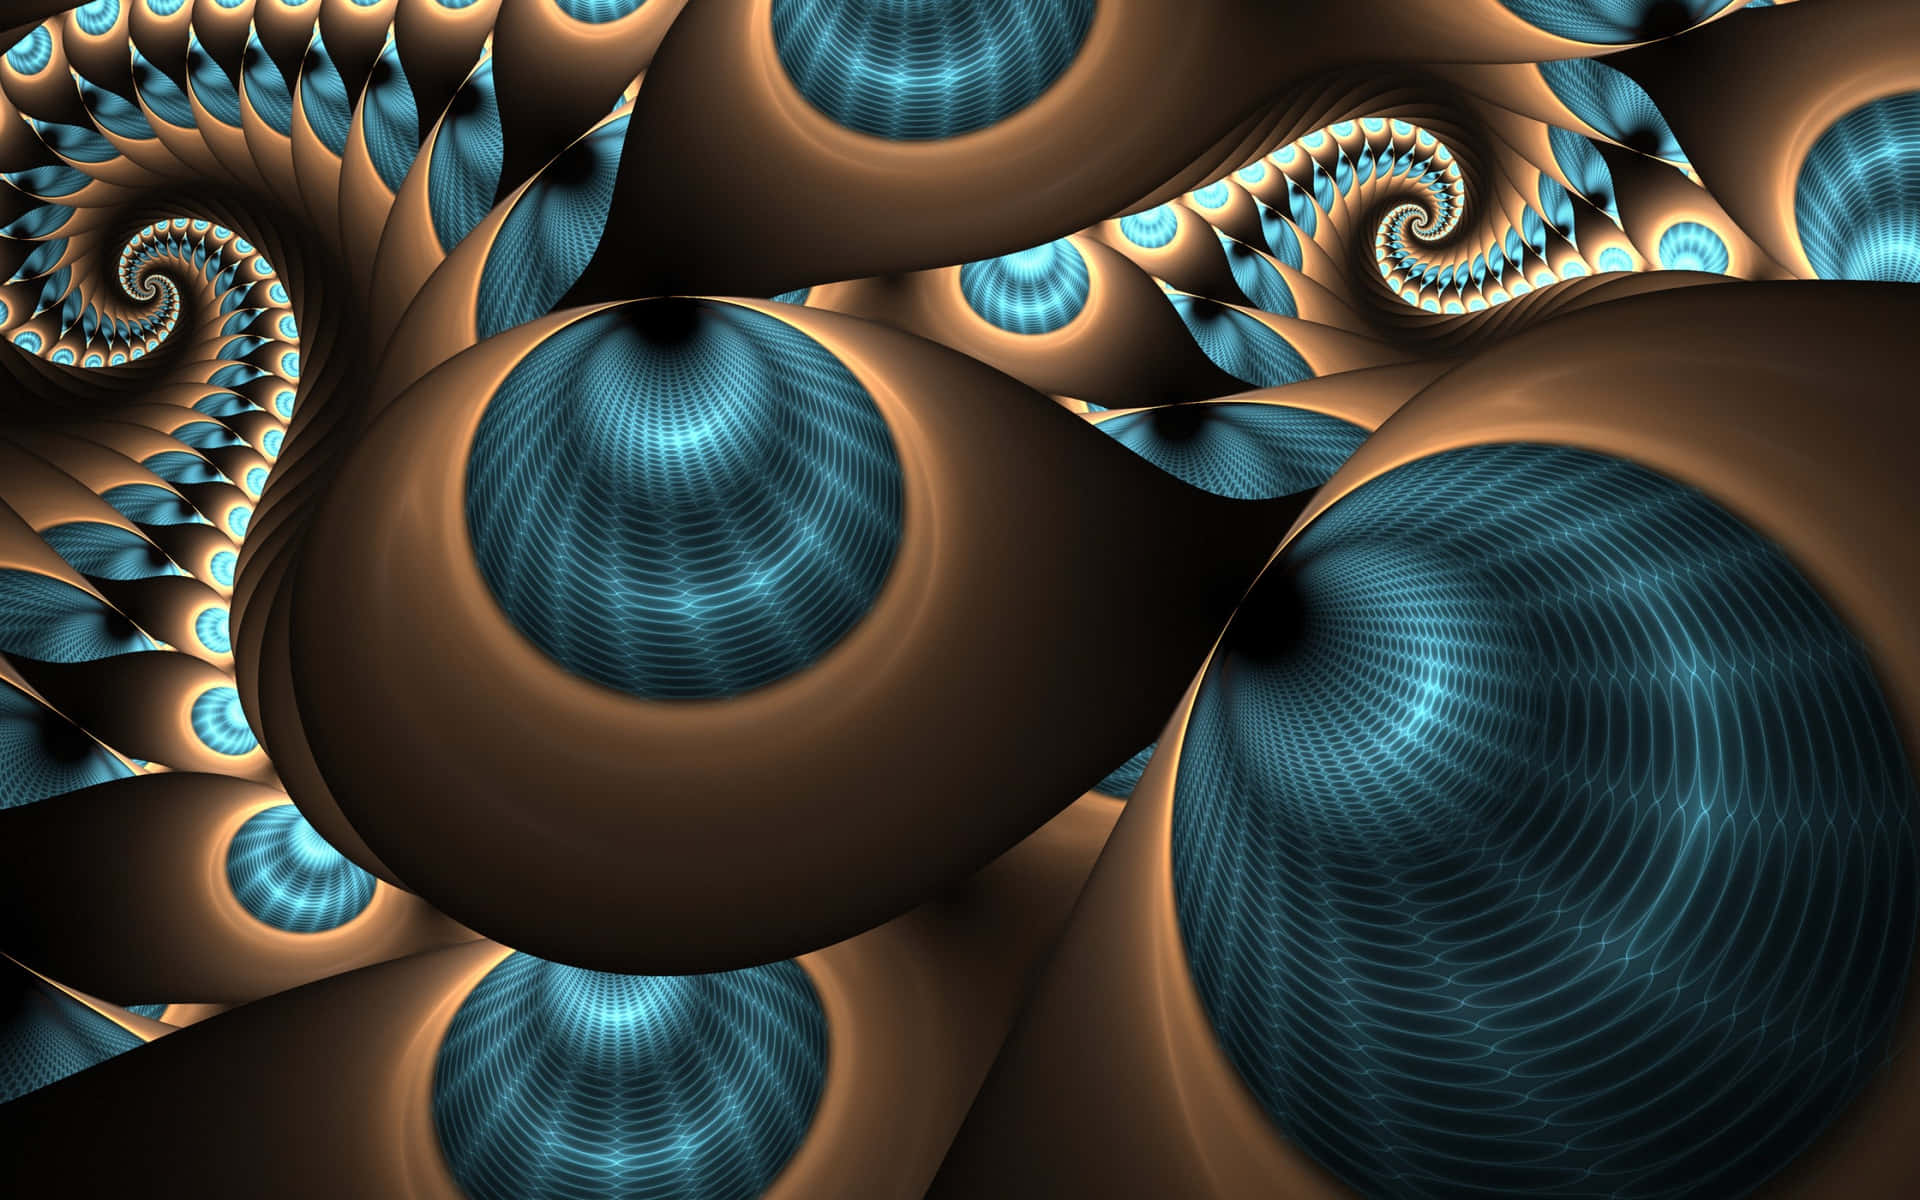 Caption: Enigmatic Swirls in Abstract Art